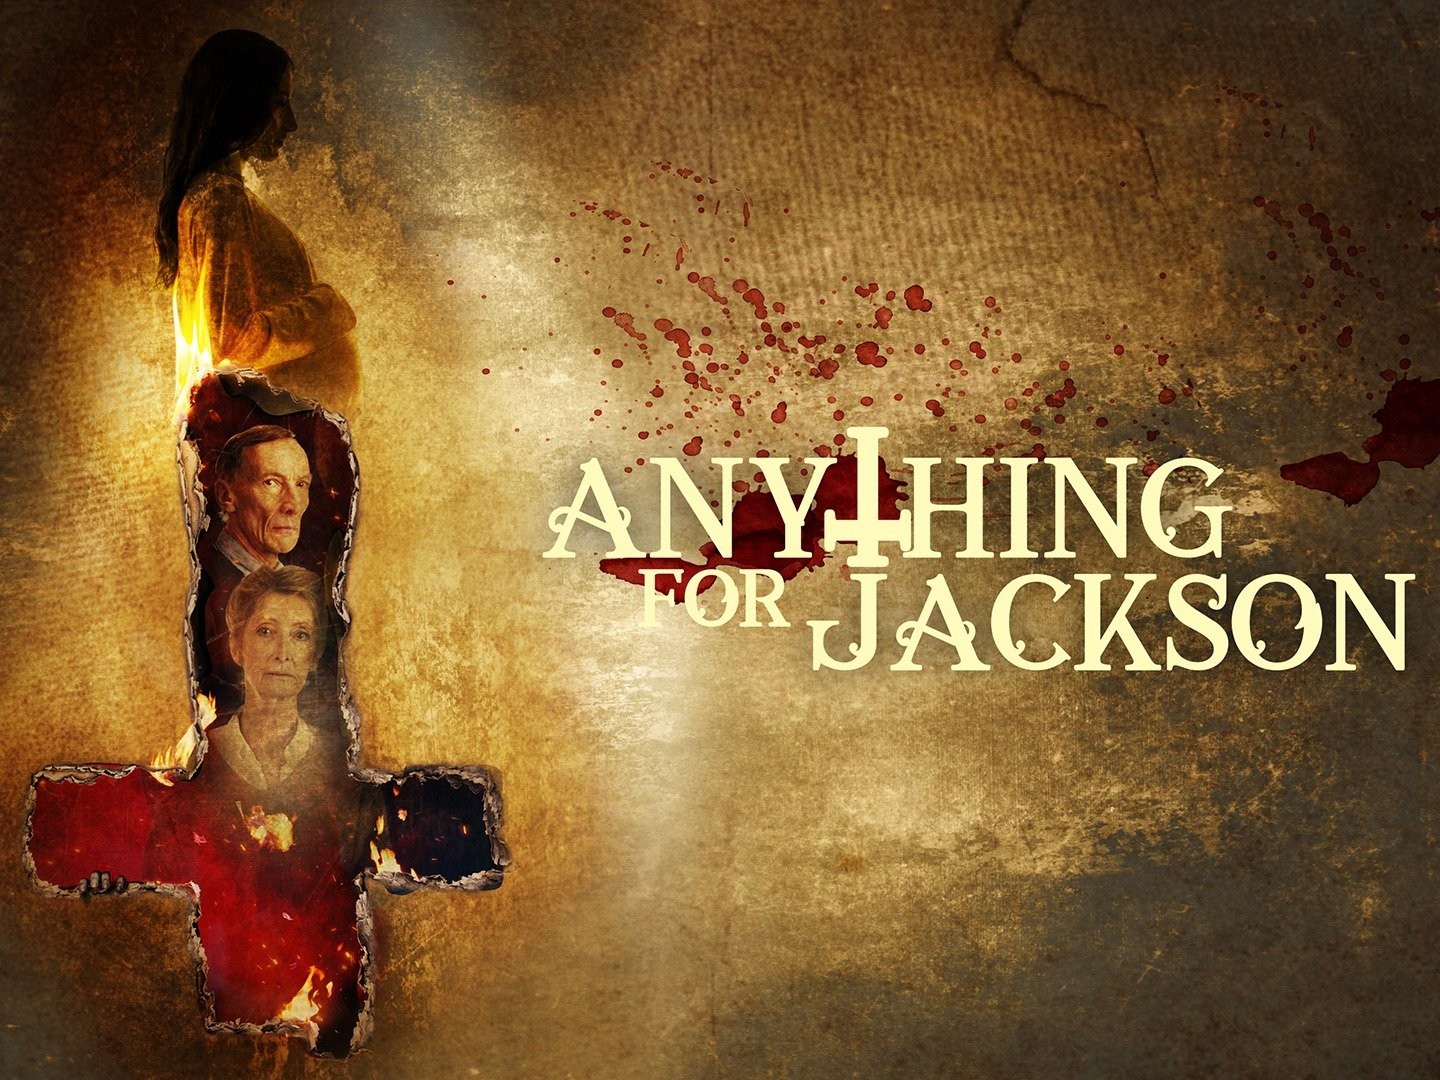 ANYTHING FOR JACKSON movie review Rec: @🎃👻ALL THINGS SPOOKY🎃👻 #fy